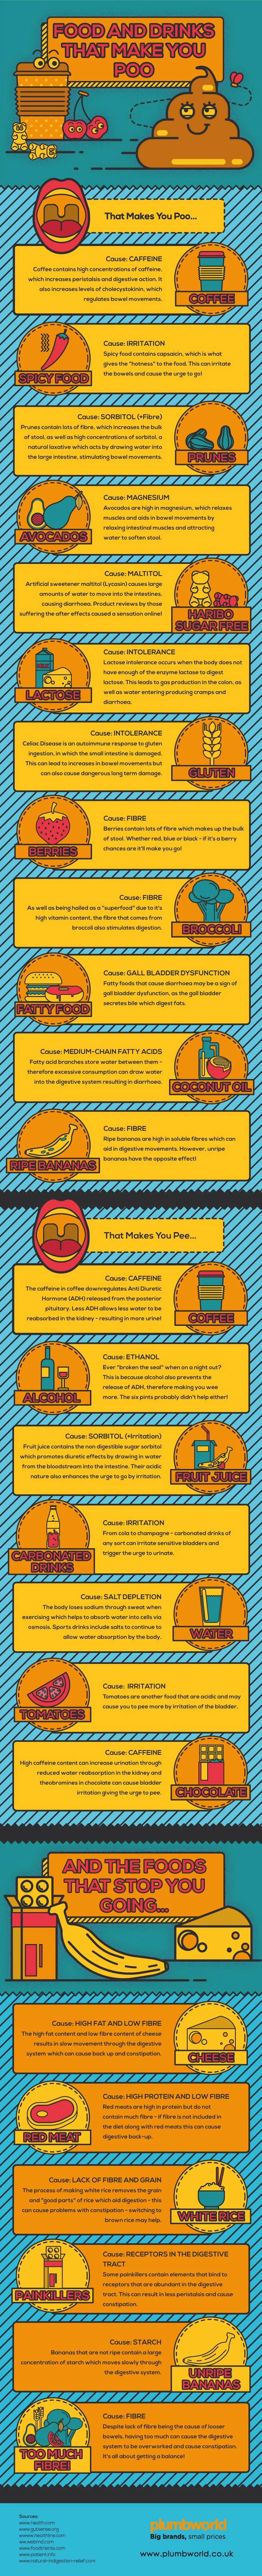 Food and Drinks that Make you Poo Infographic